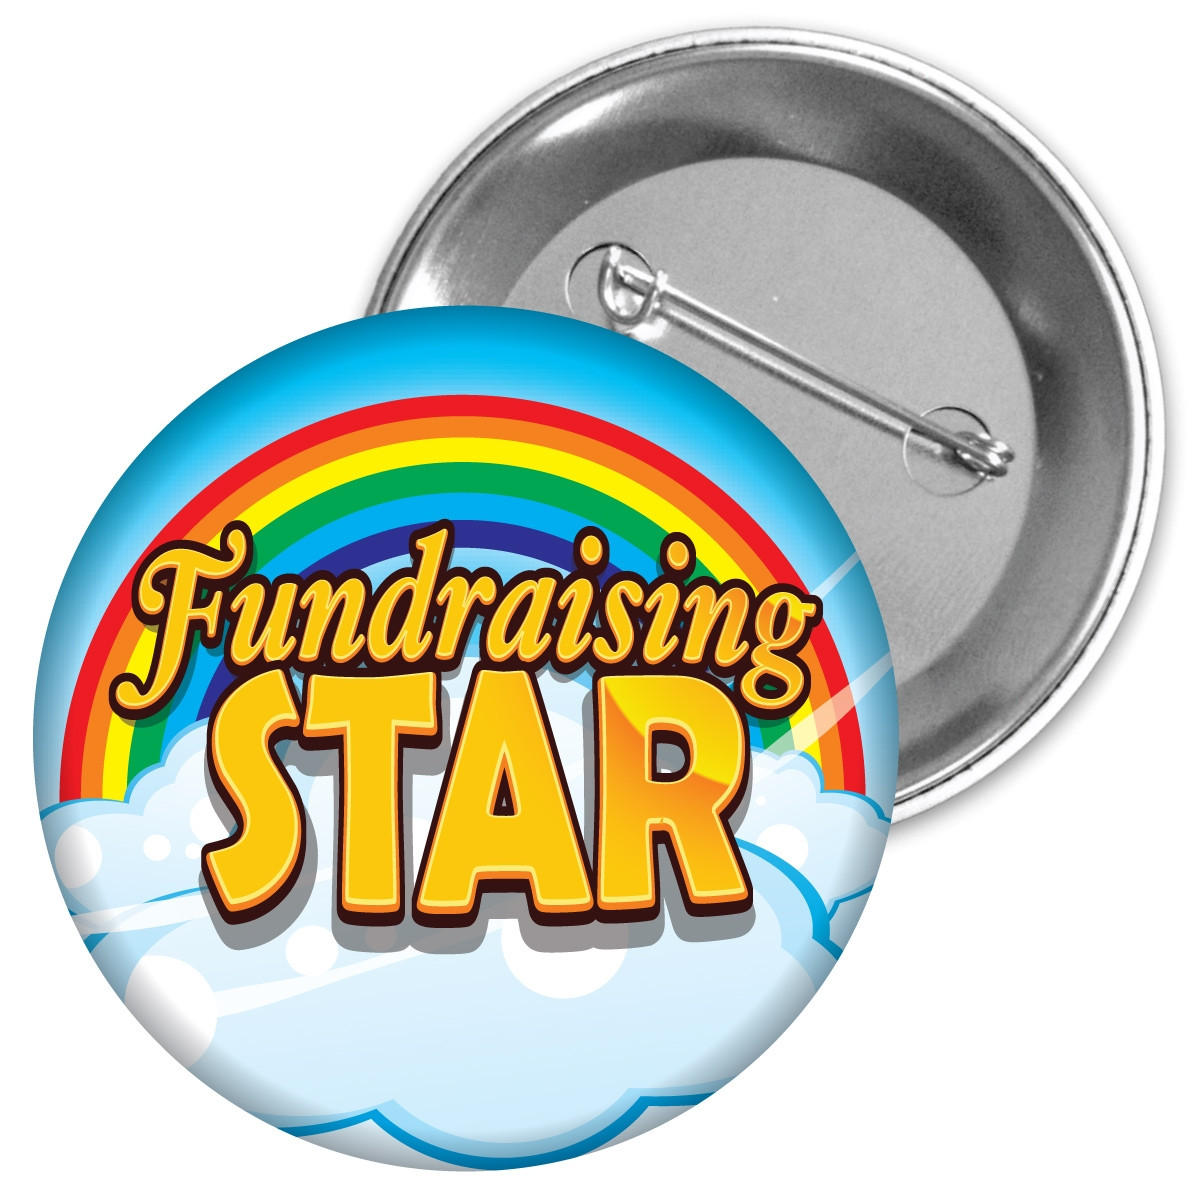 Metal Button - Fundraising Star